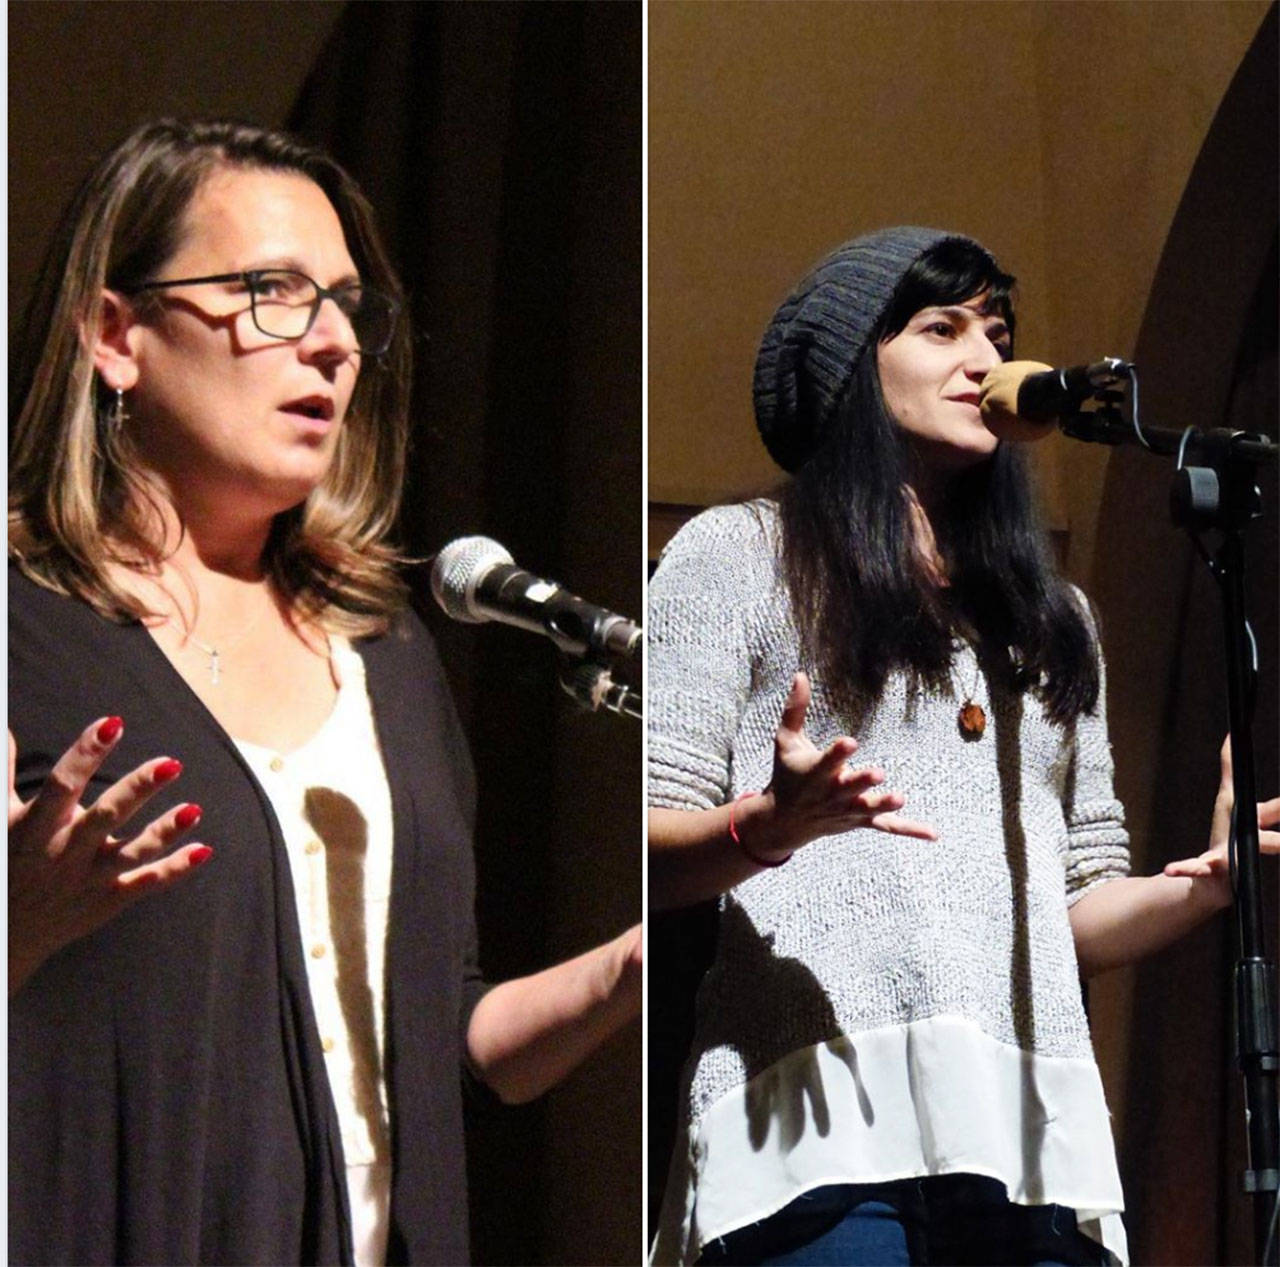 Jeanne Sparks, left, and Nessa Goldman host a story slam at Olympic Theatre Arts on Nov. 21. Submitted photos